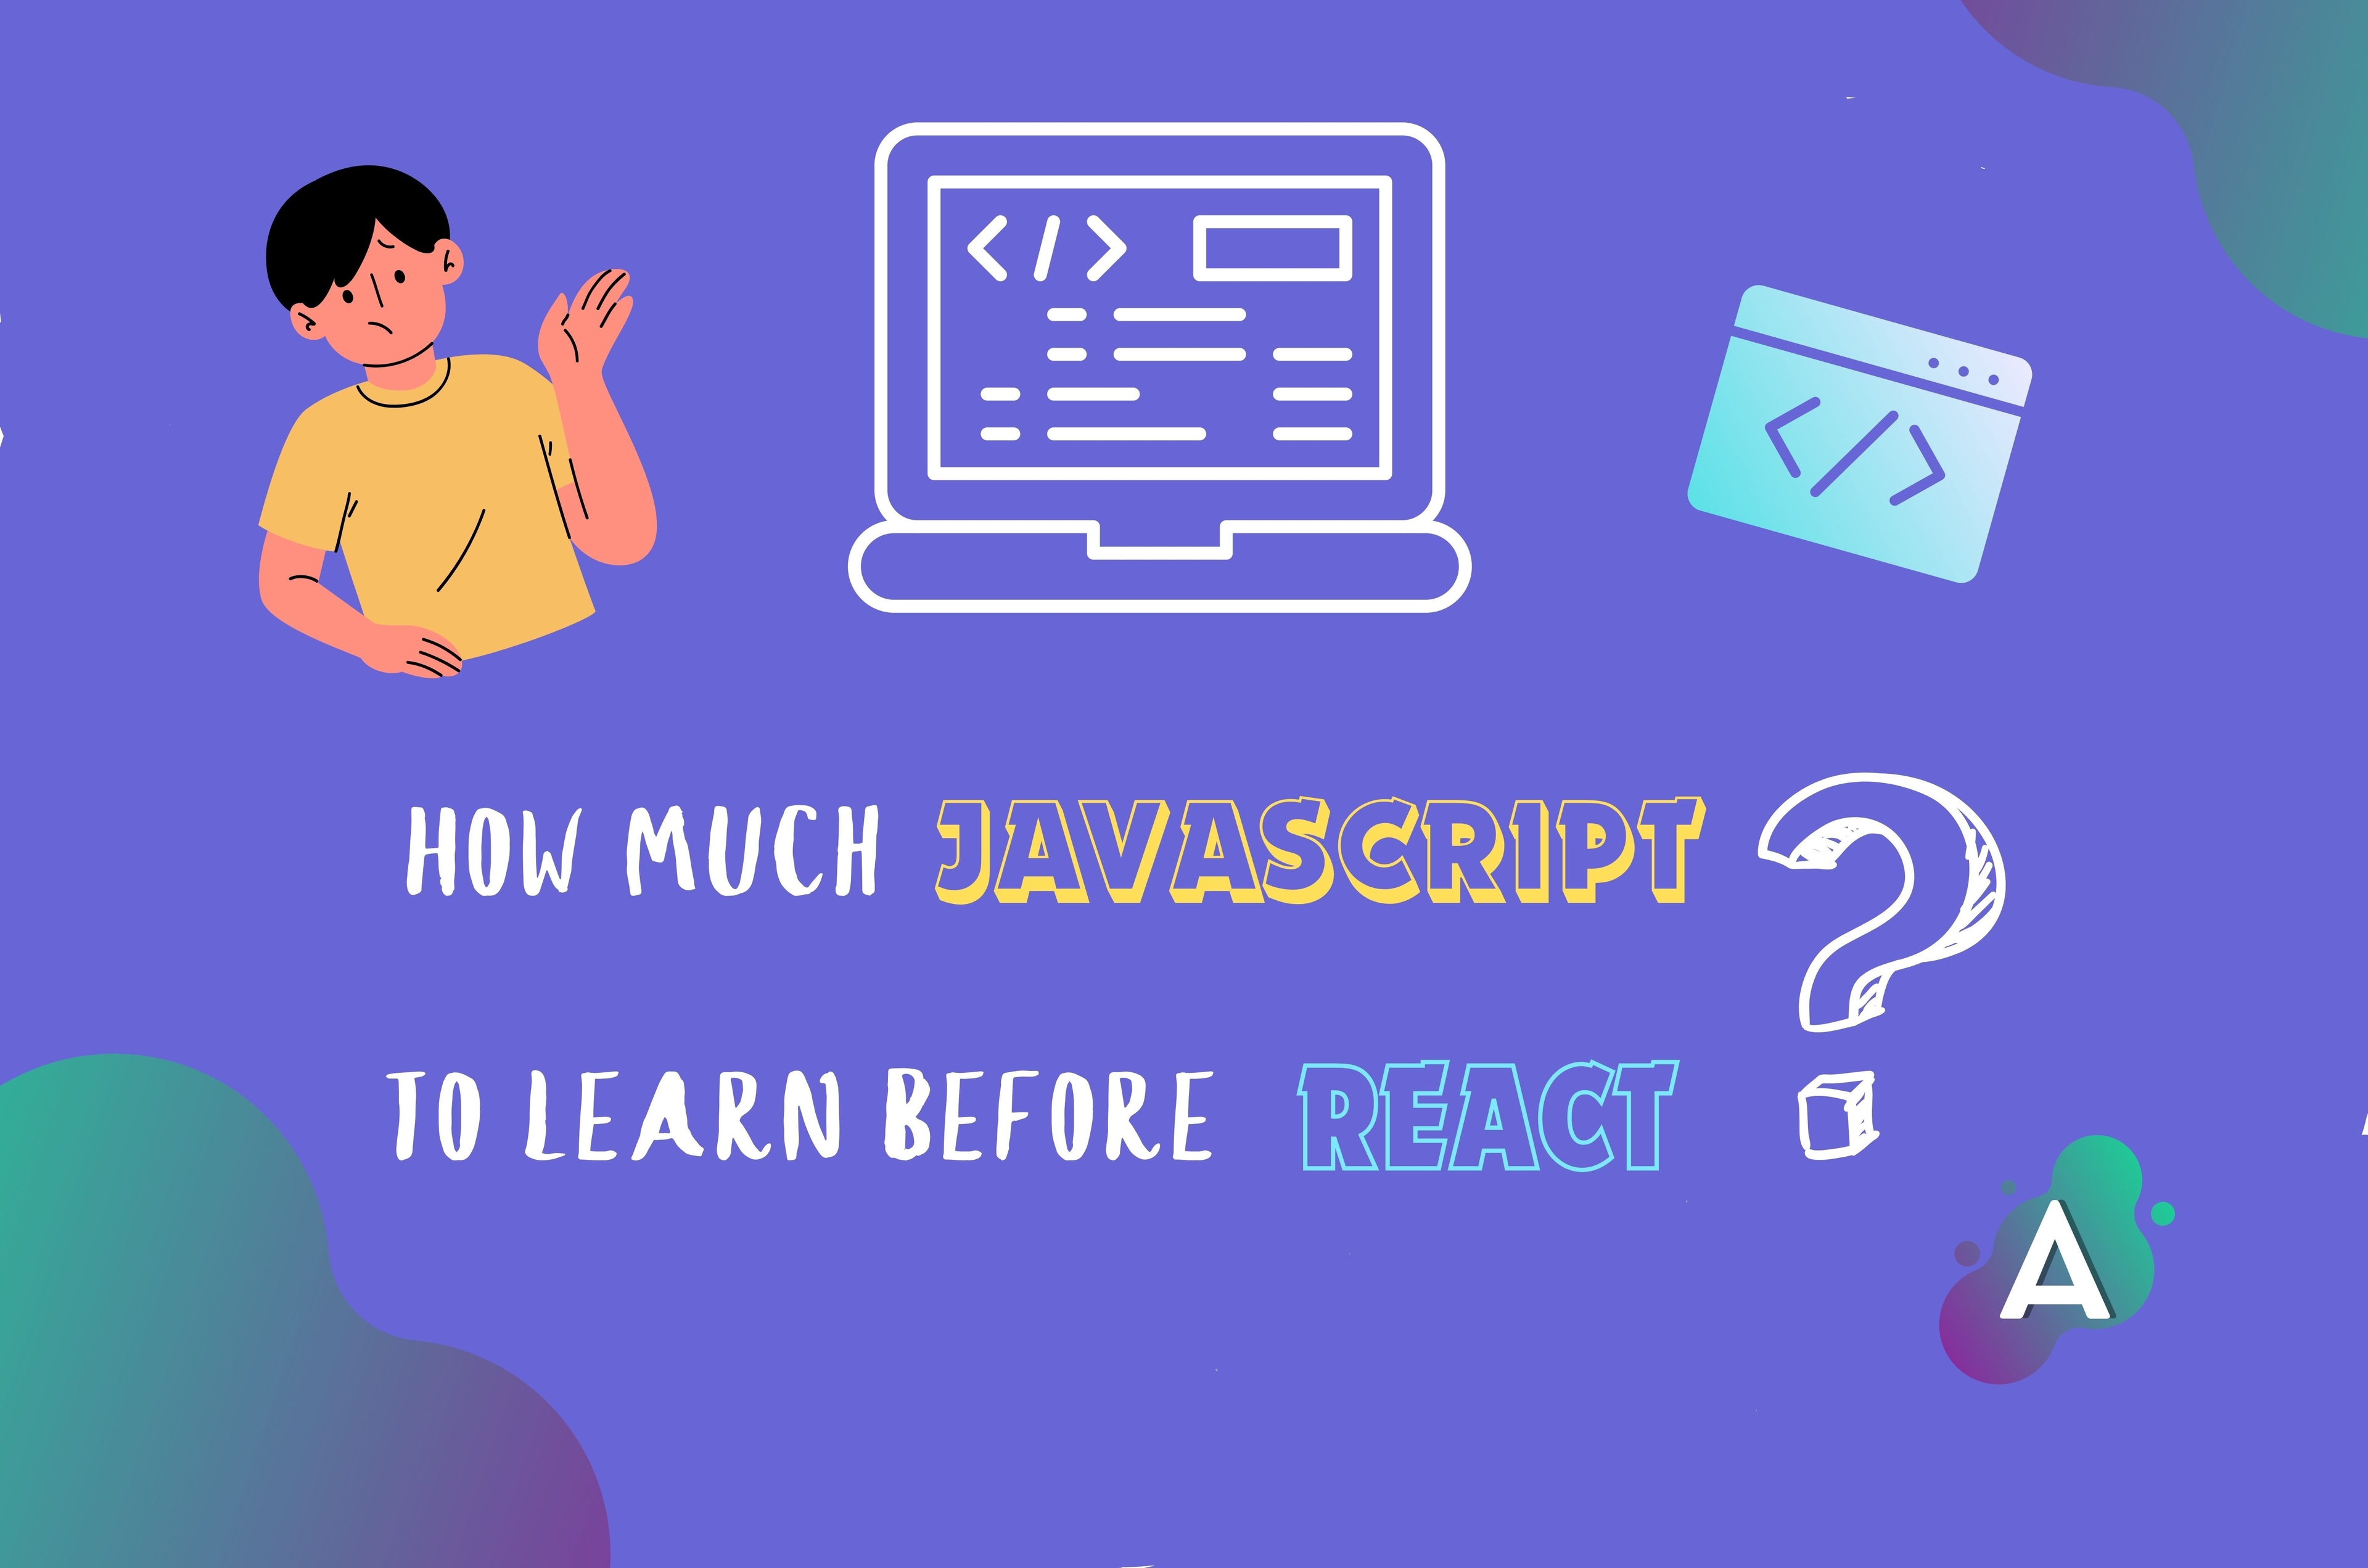 How much JavaScript do I need to know before learning React?